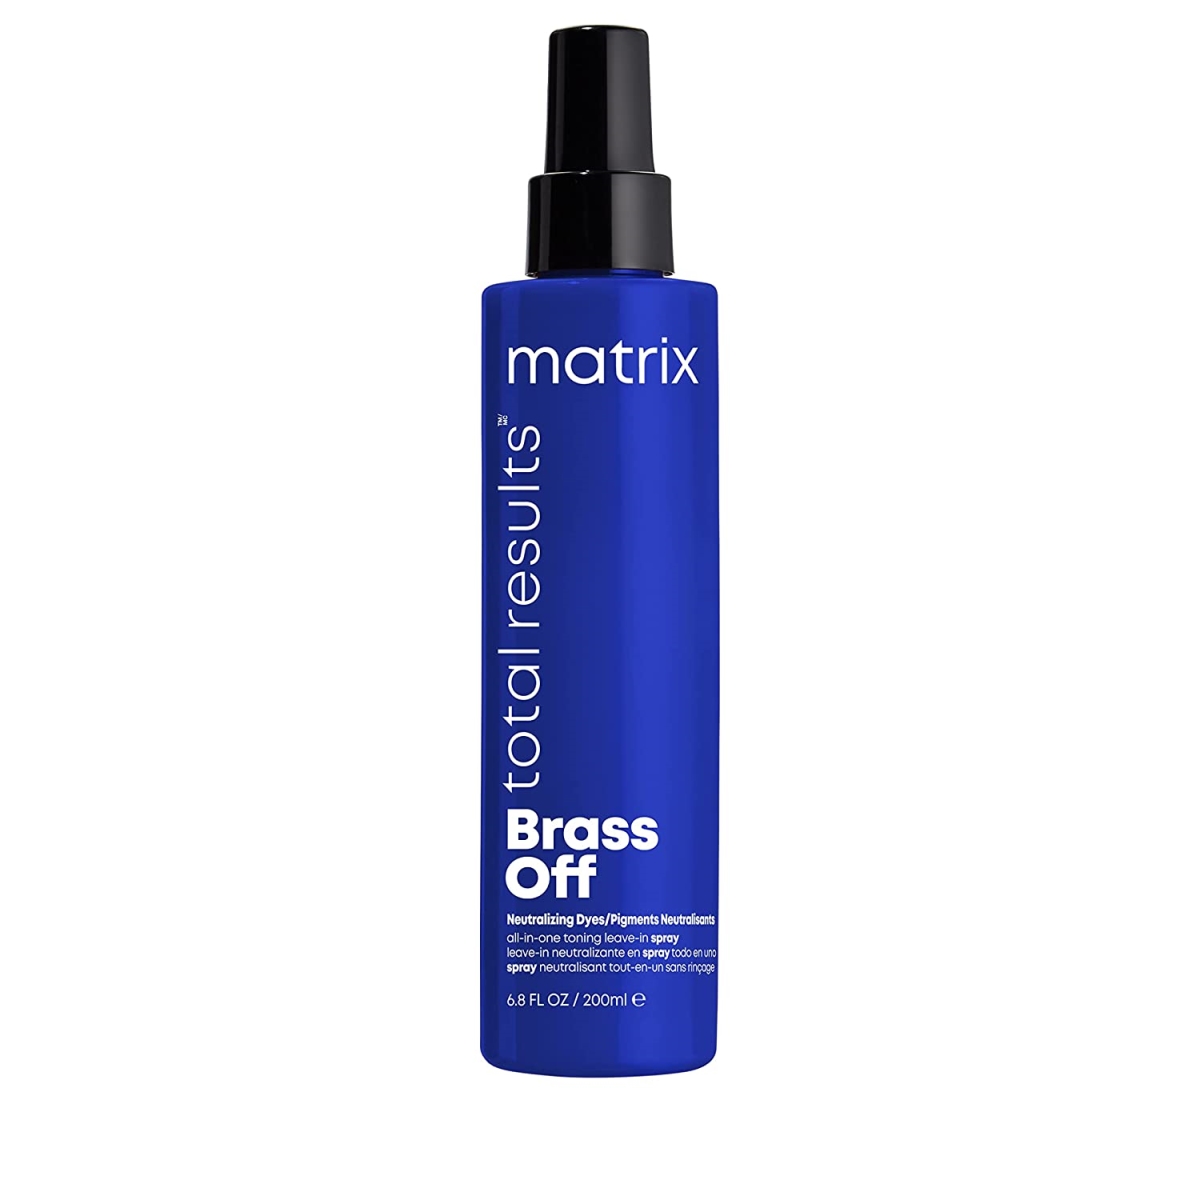 Picture of Matrix 449284 6.8 oz Total Results Brass Off All-in-One Toning Leave-In Spray for Unisex